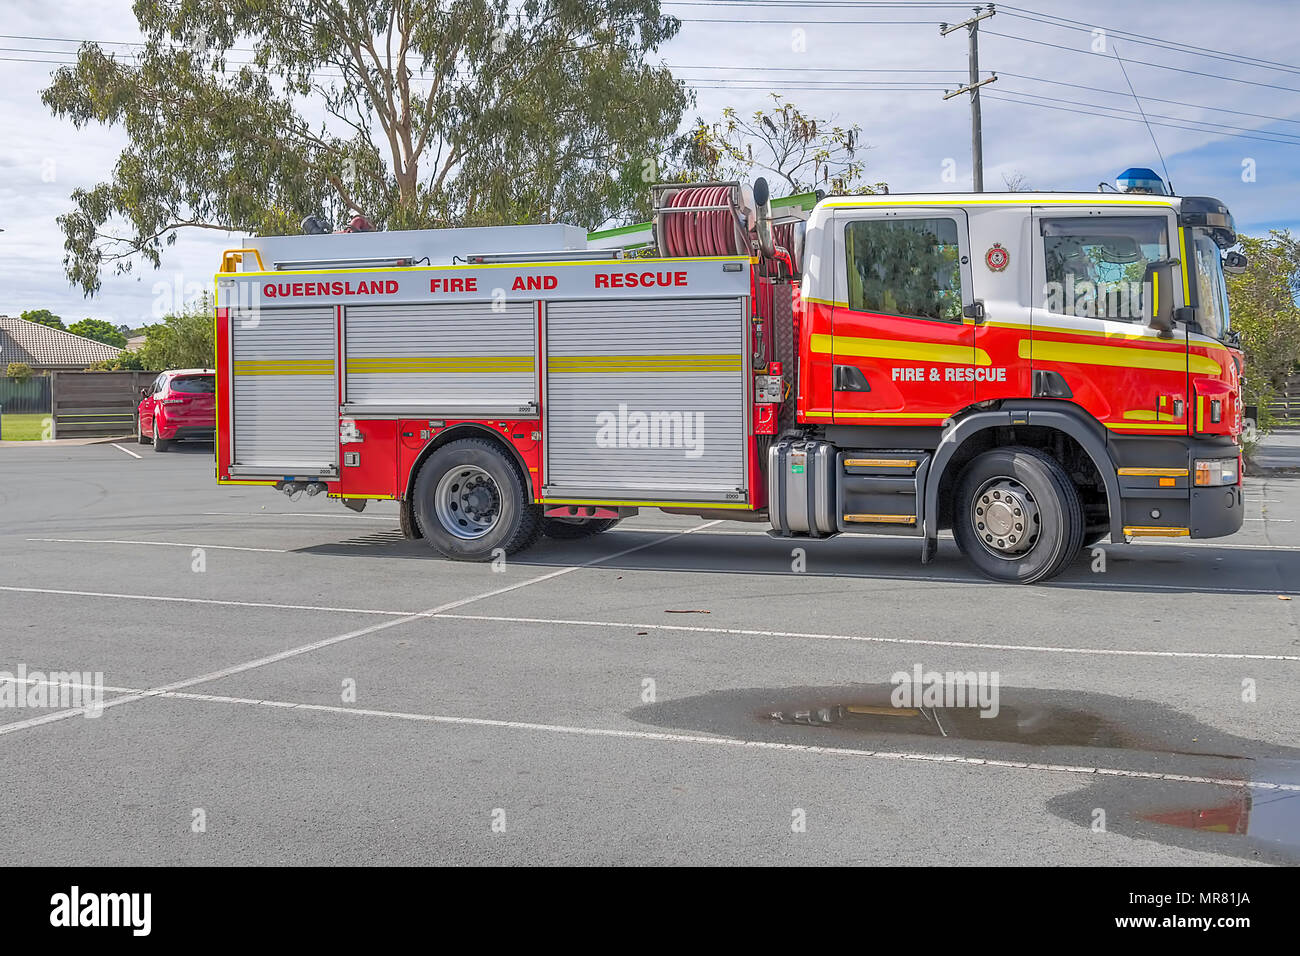 Fire and rescue truck stopped in car park Stock Photo